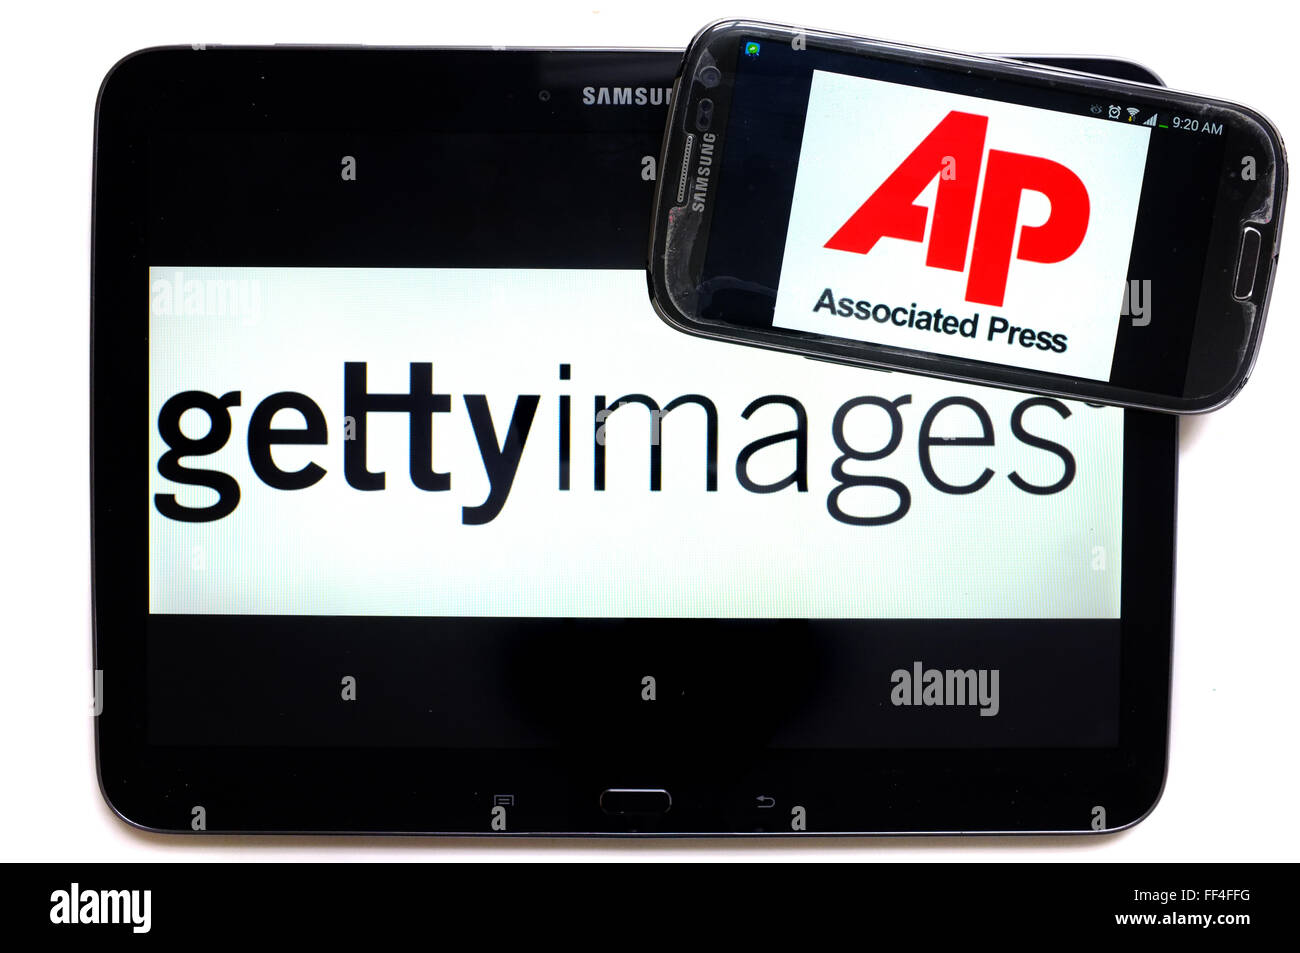 The AP logo on a smartphone and Getty Images on a tablet photographed against a white background. Stock Photo